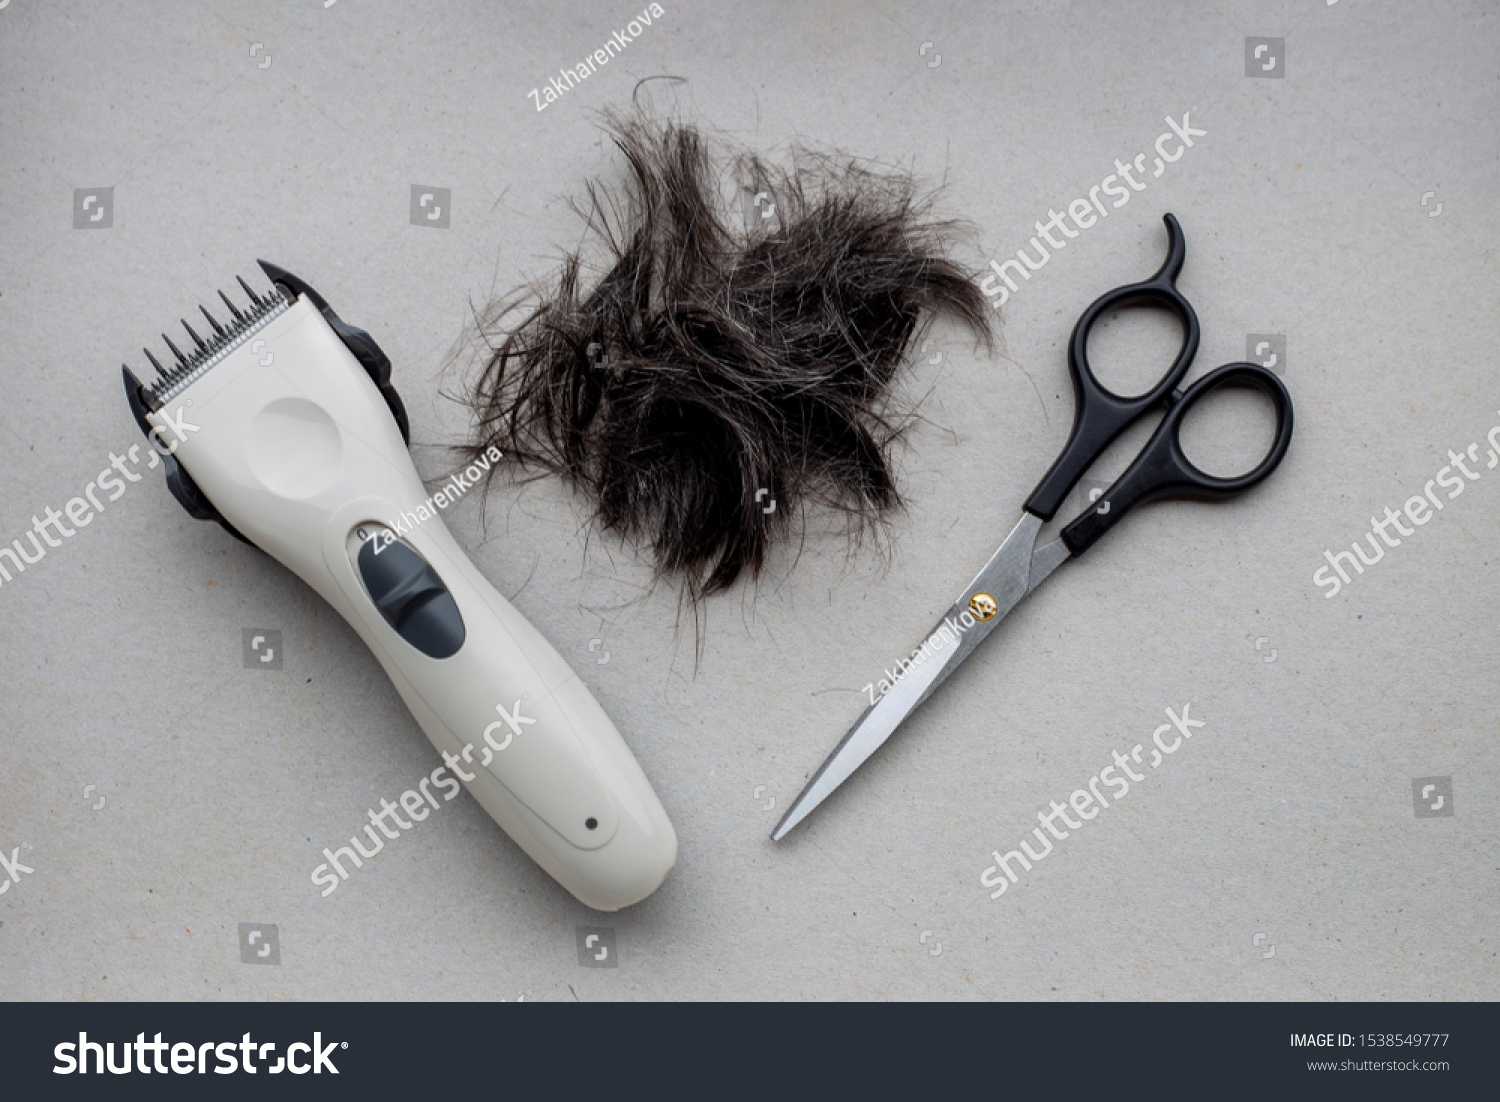 cutting hair with clippers vs scissors